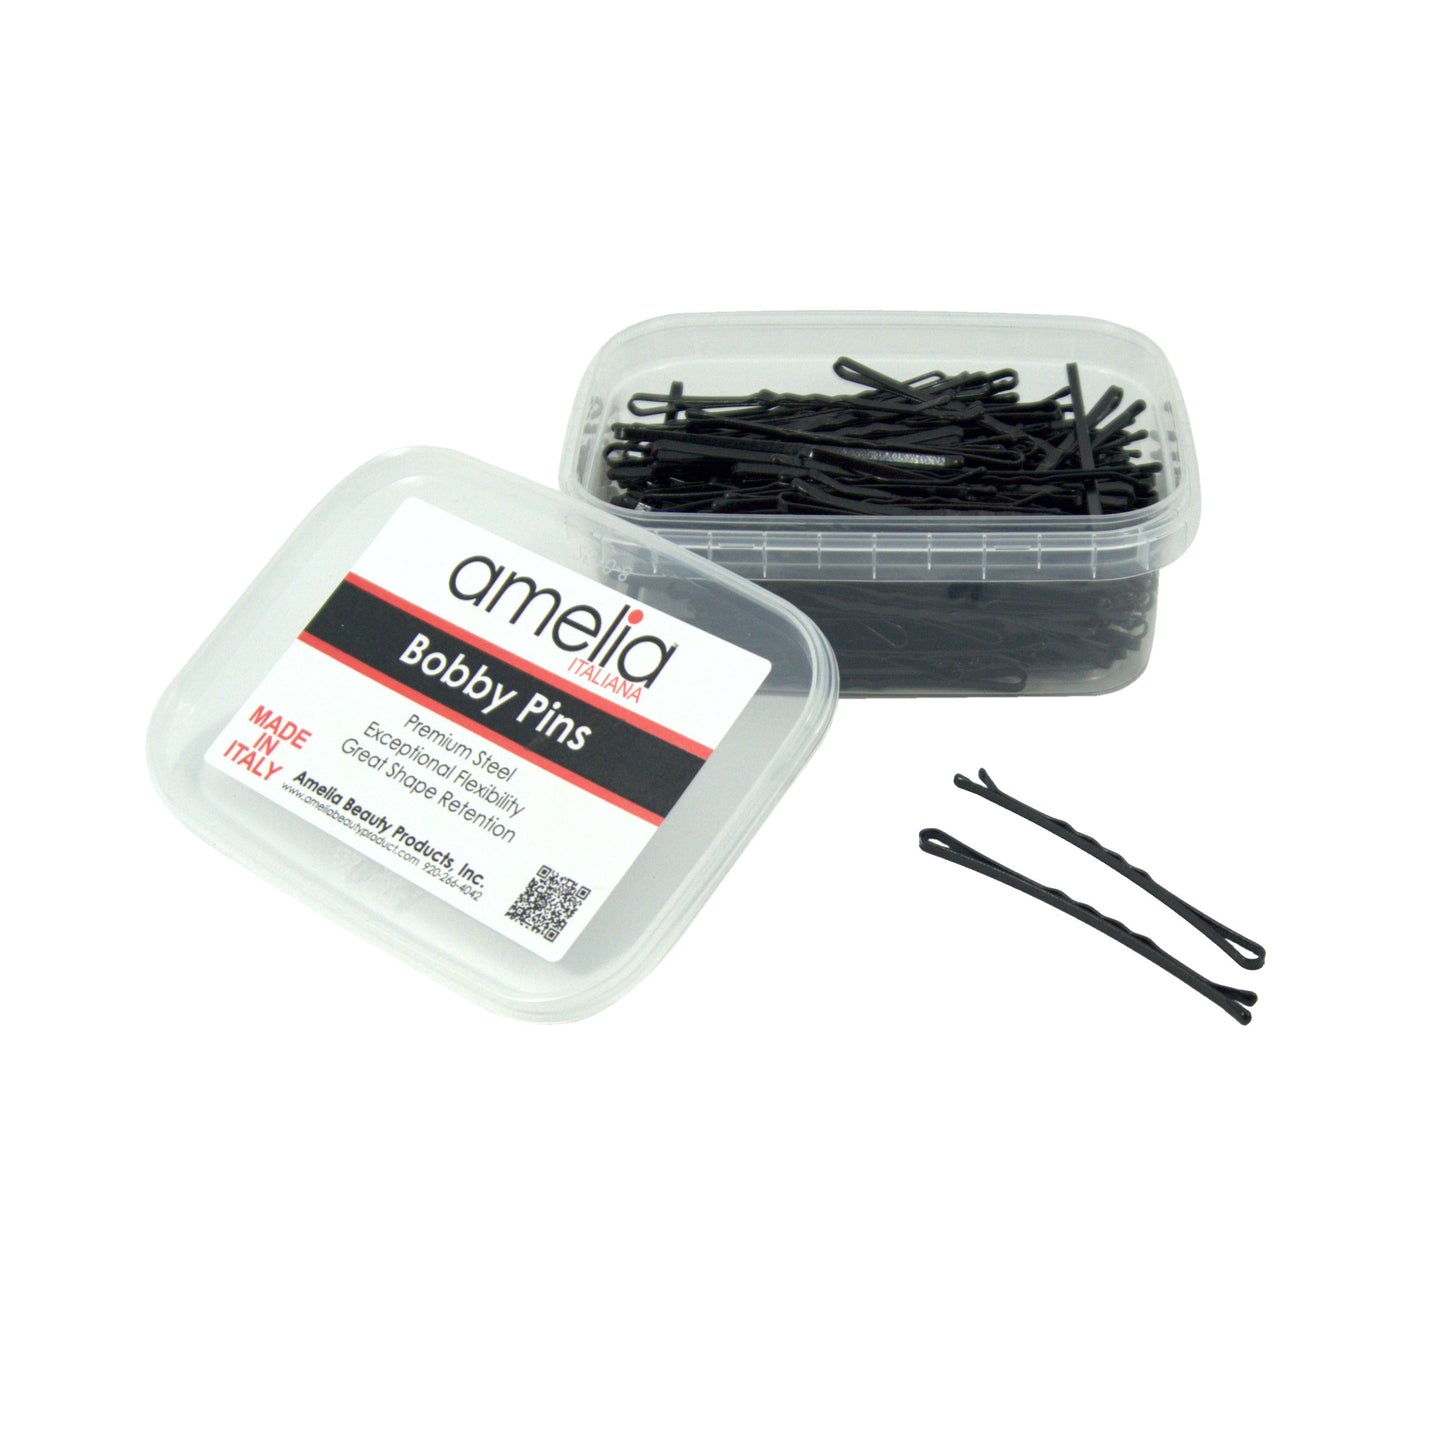 180, Black, 2.8in (7.0cm), Italian Made Jumbo Bobby Pins, Recloseable Stay Clean and Organized Container